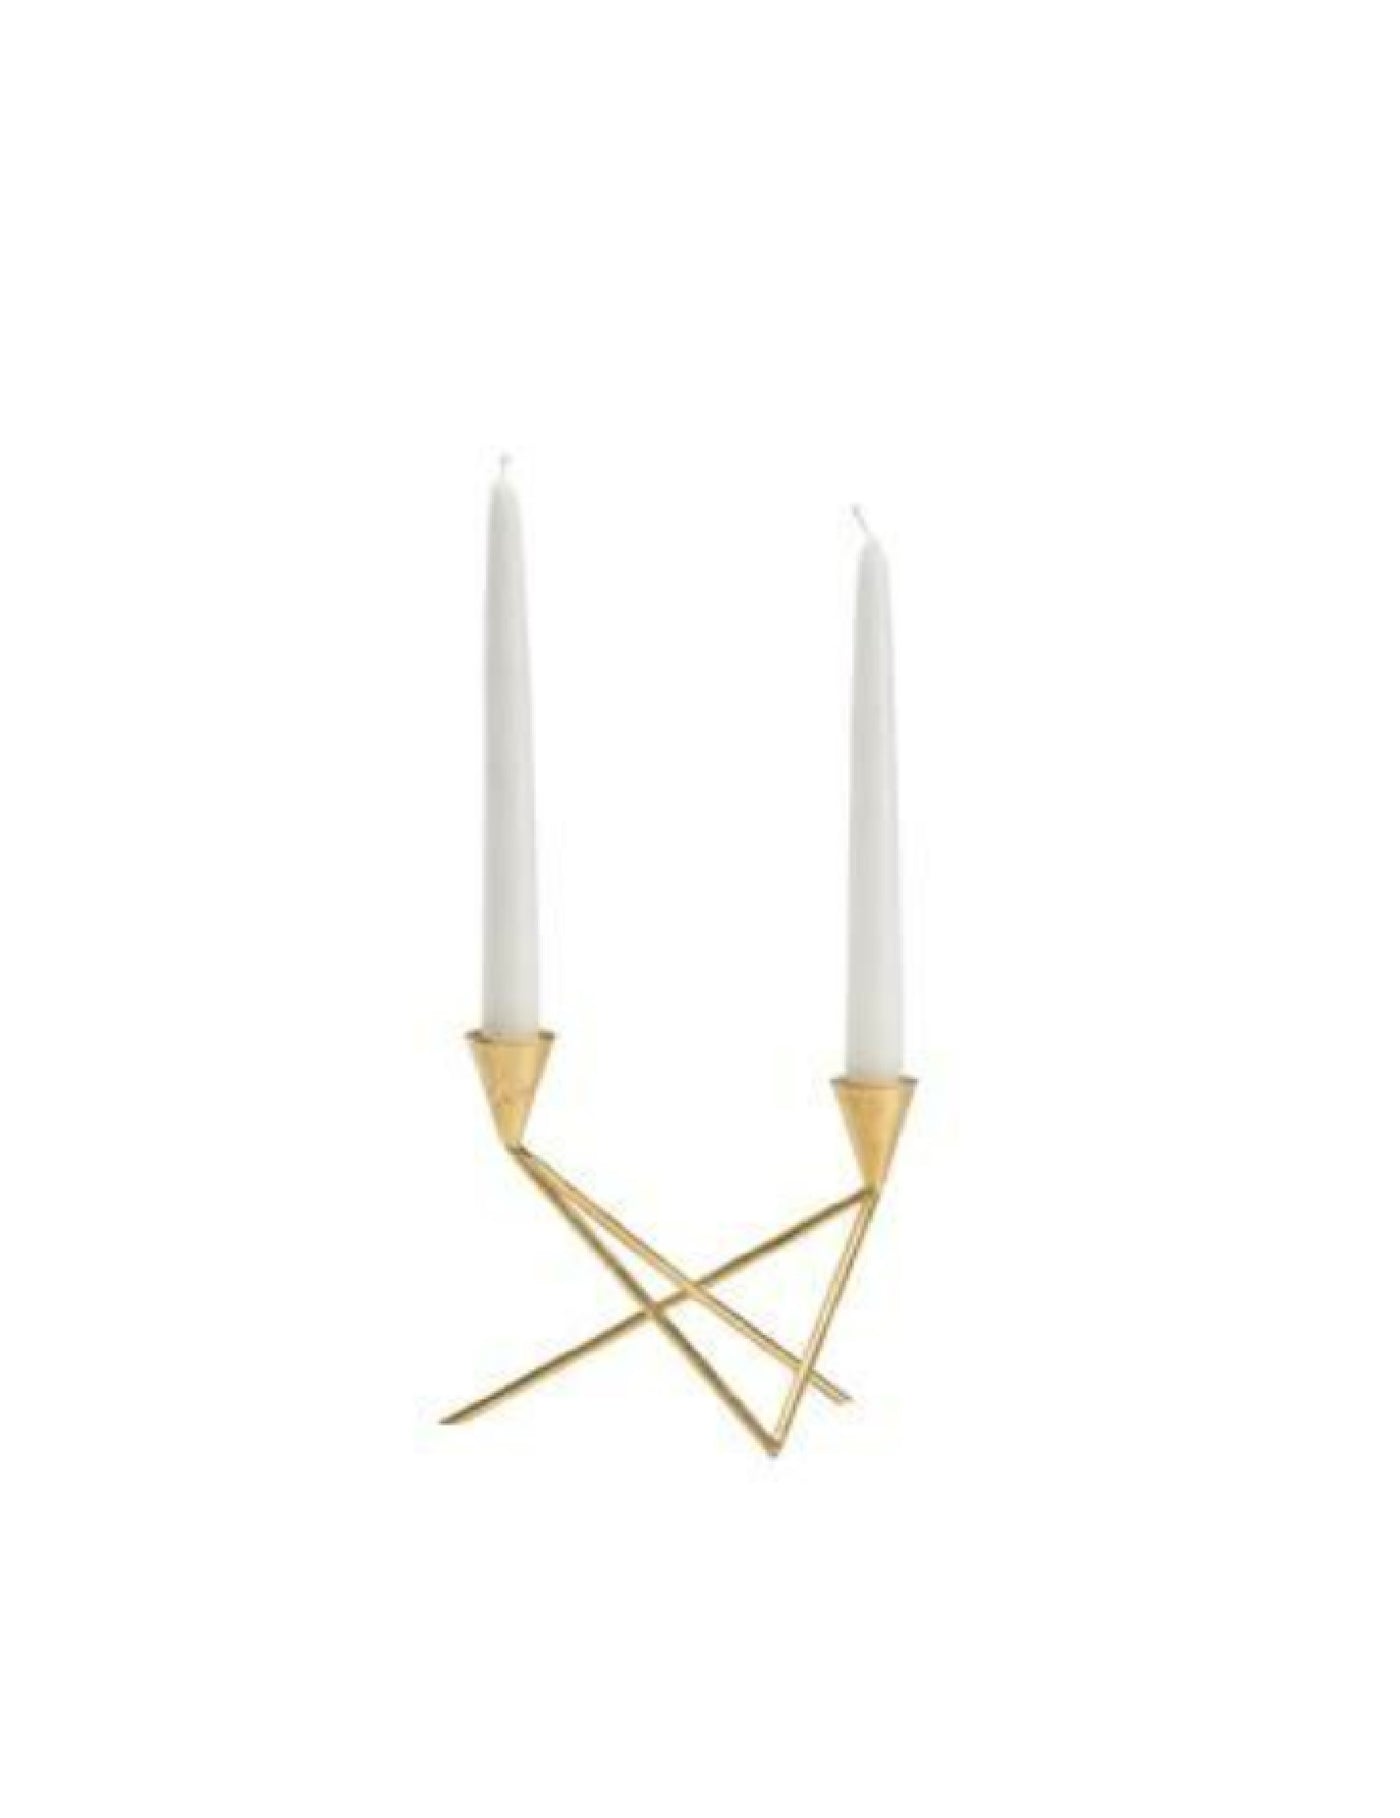 DOUBLE GOLD CANDLESTICK